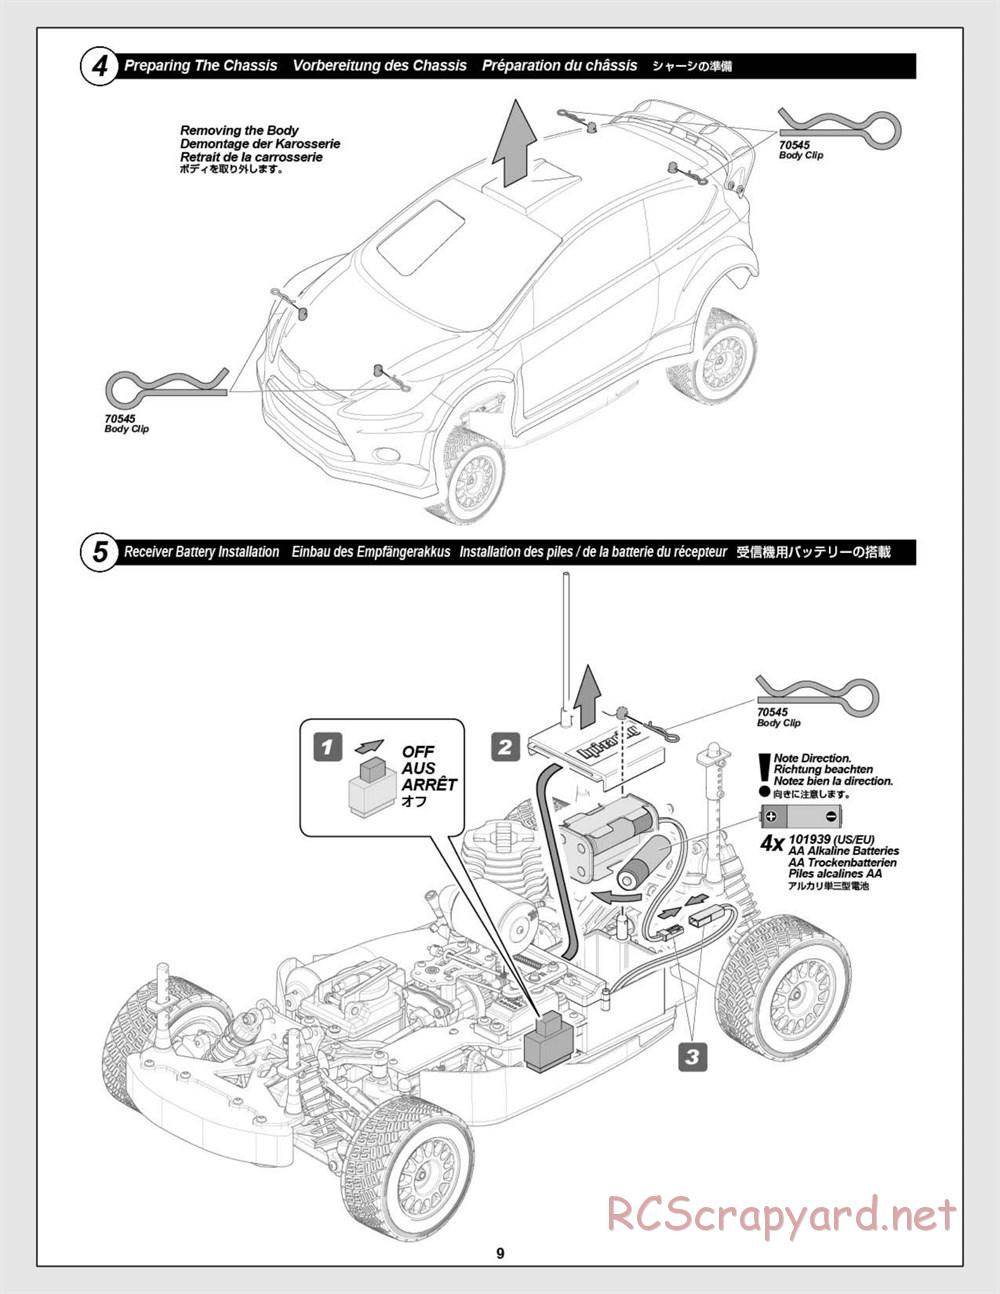 HPI - WR8 3.0 - Manual - Page 9